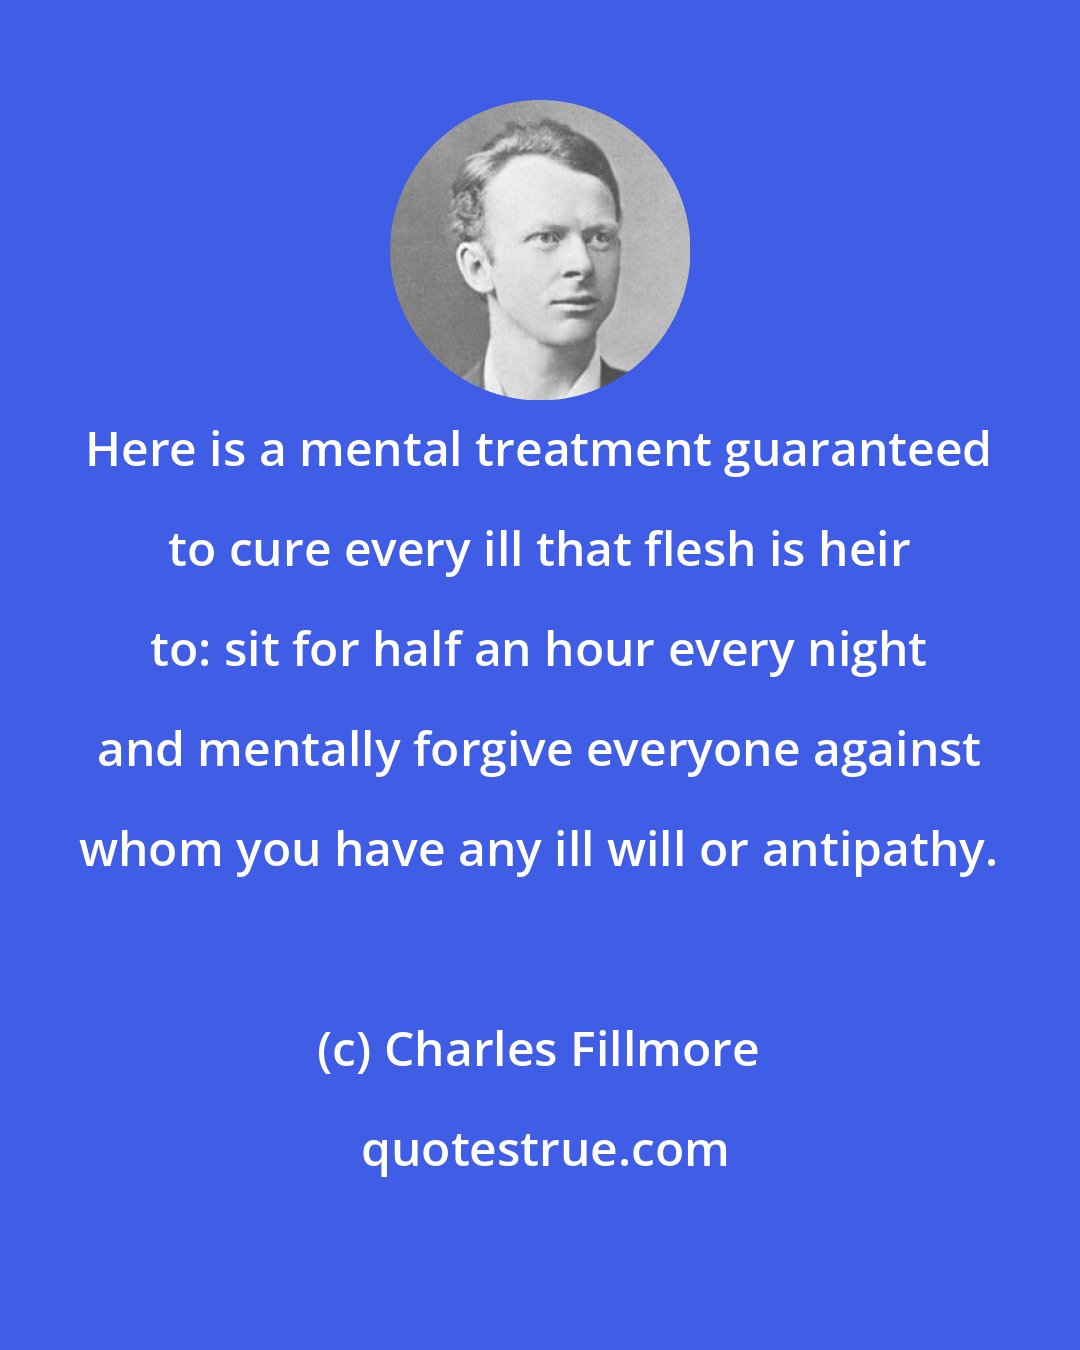 Charles Fillmore: Here is a mental treatment guaranteed to cure every ill that flesh is heir to: sit for half an hour every night and mentally forgive everyone against whom you have any ill will or antipathy.